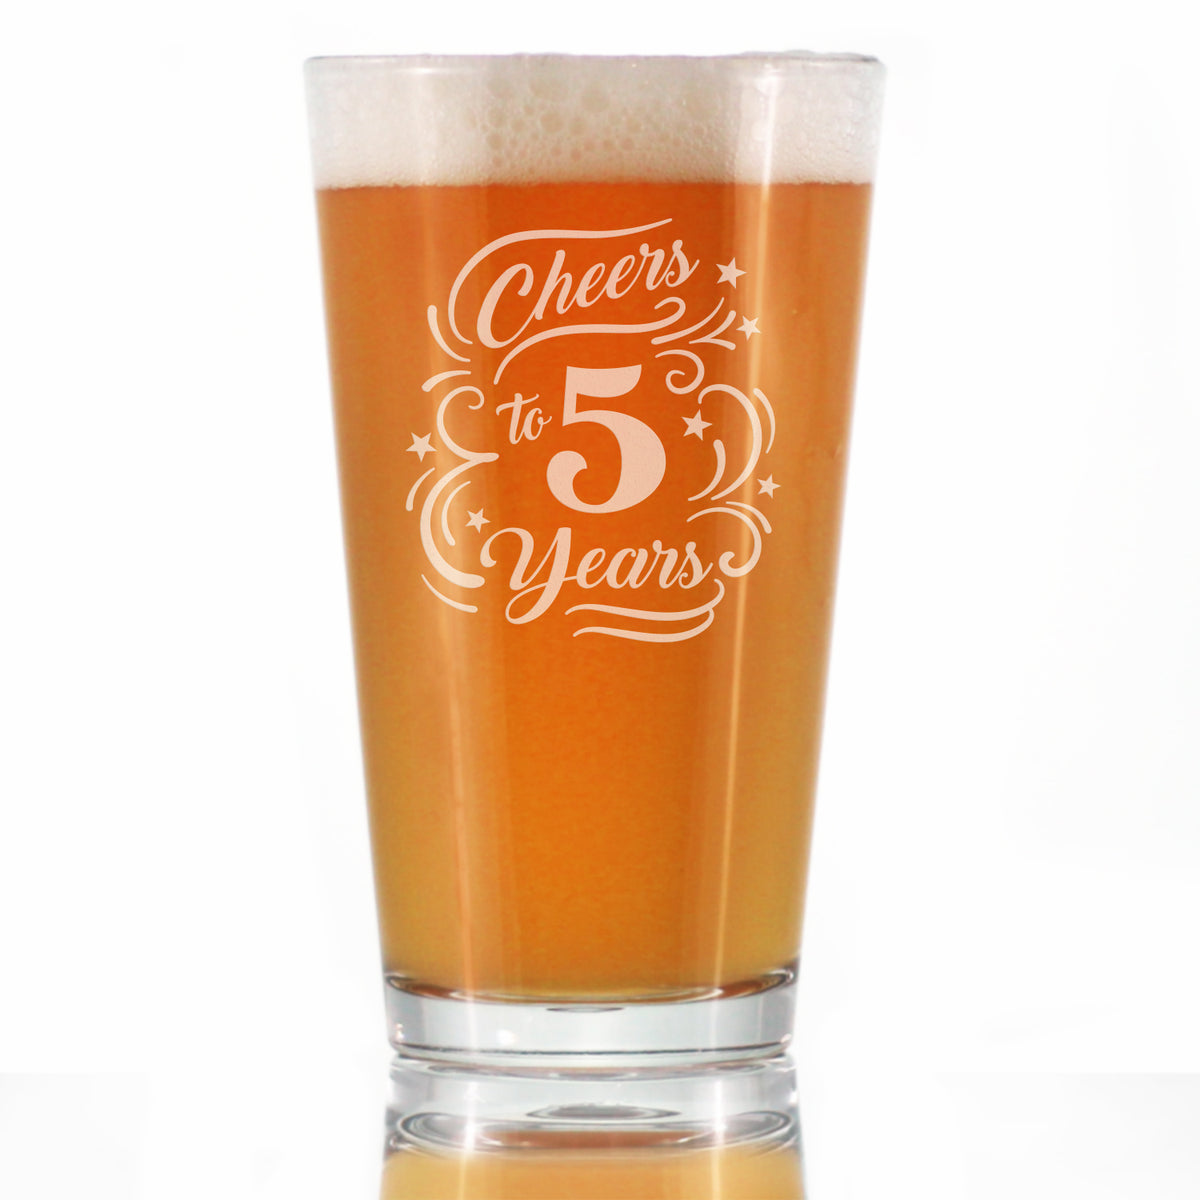 Cheers to 5 Years - Pint Glass for Beer - Gifts for Women &amp; Men - 5th Anniversary Party Decor - 16 Oz Glasses